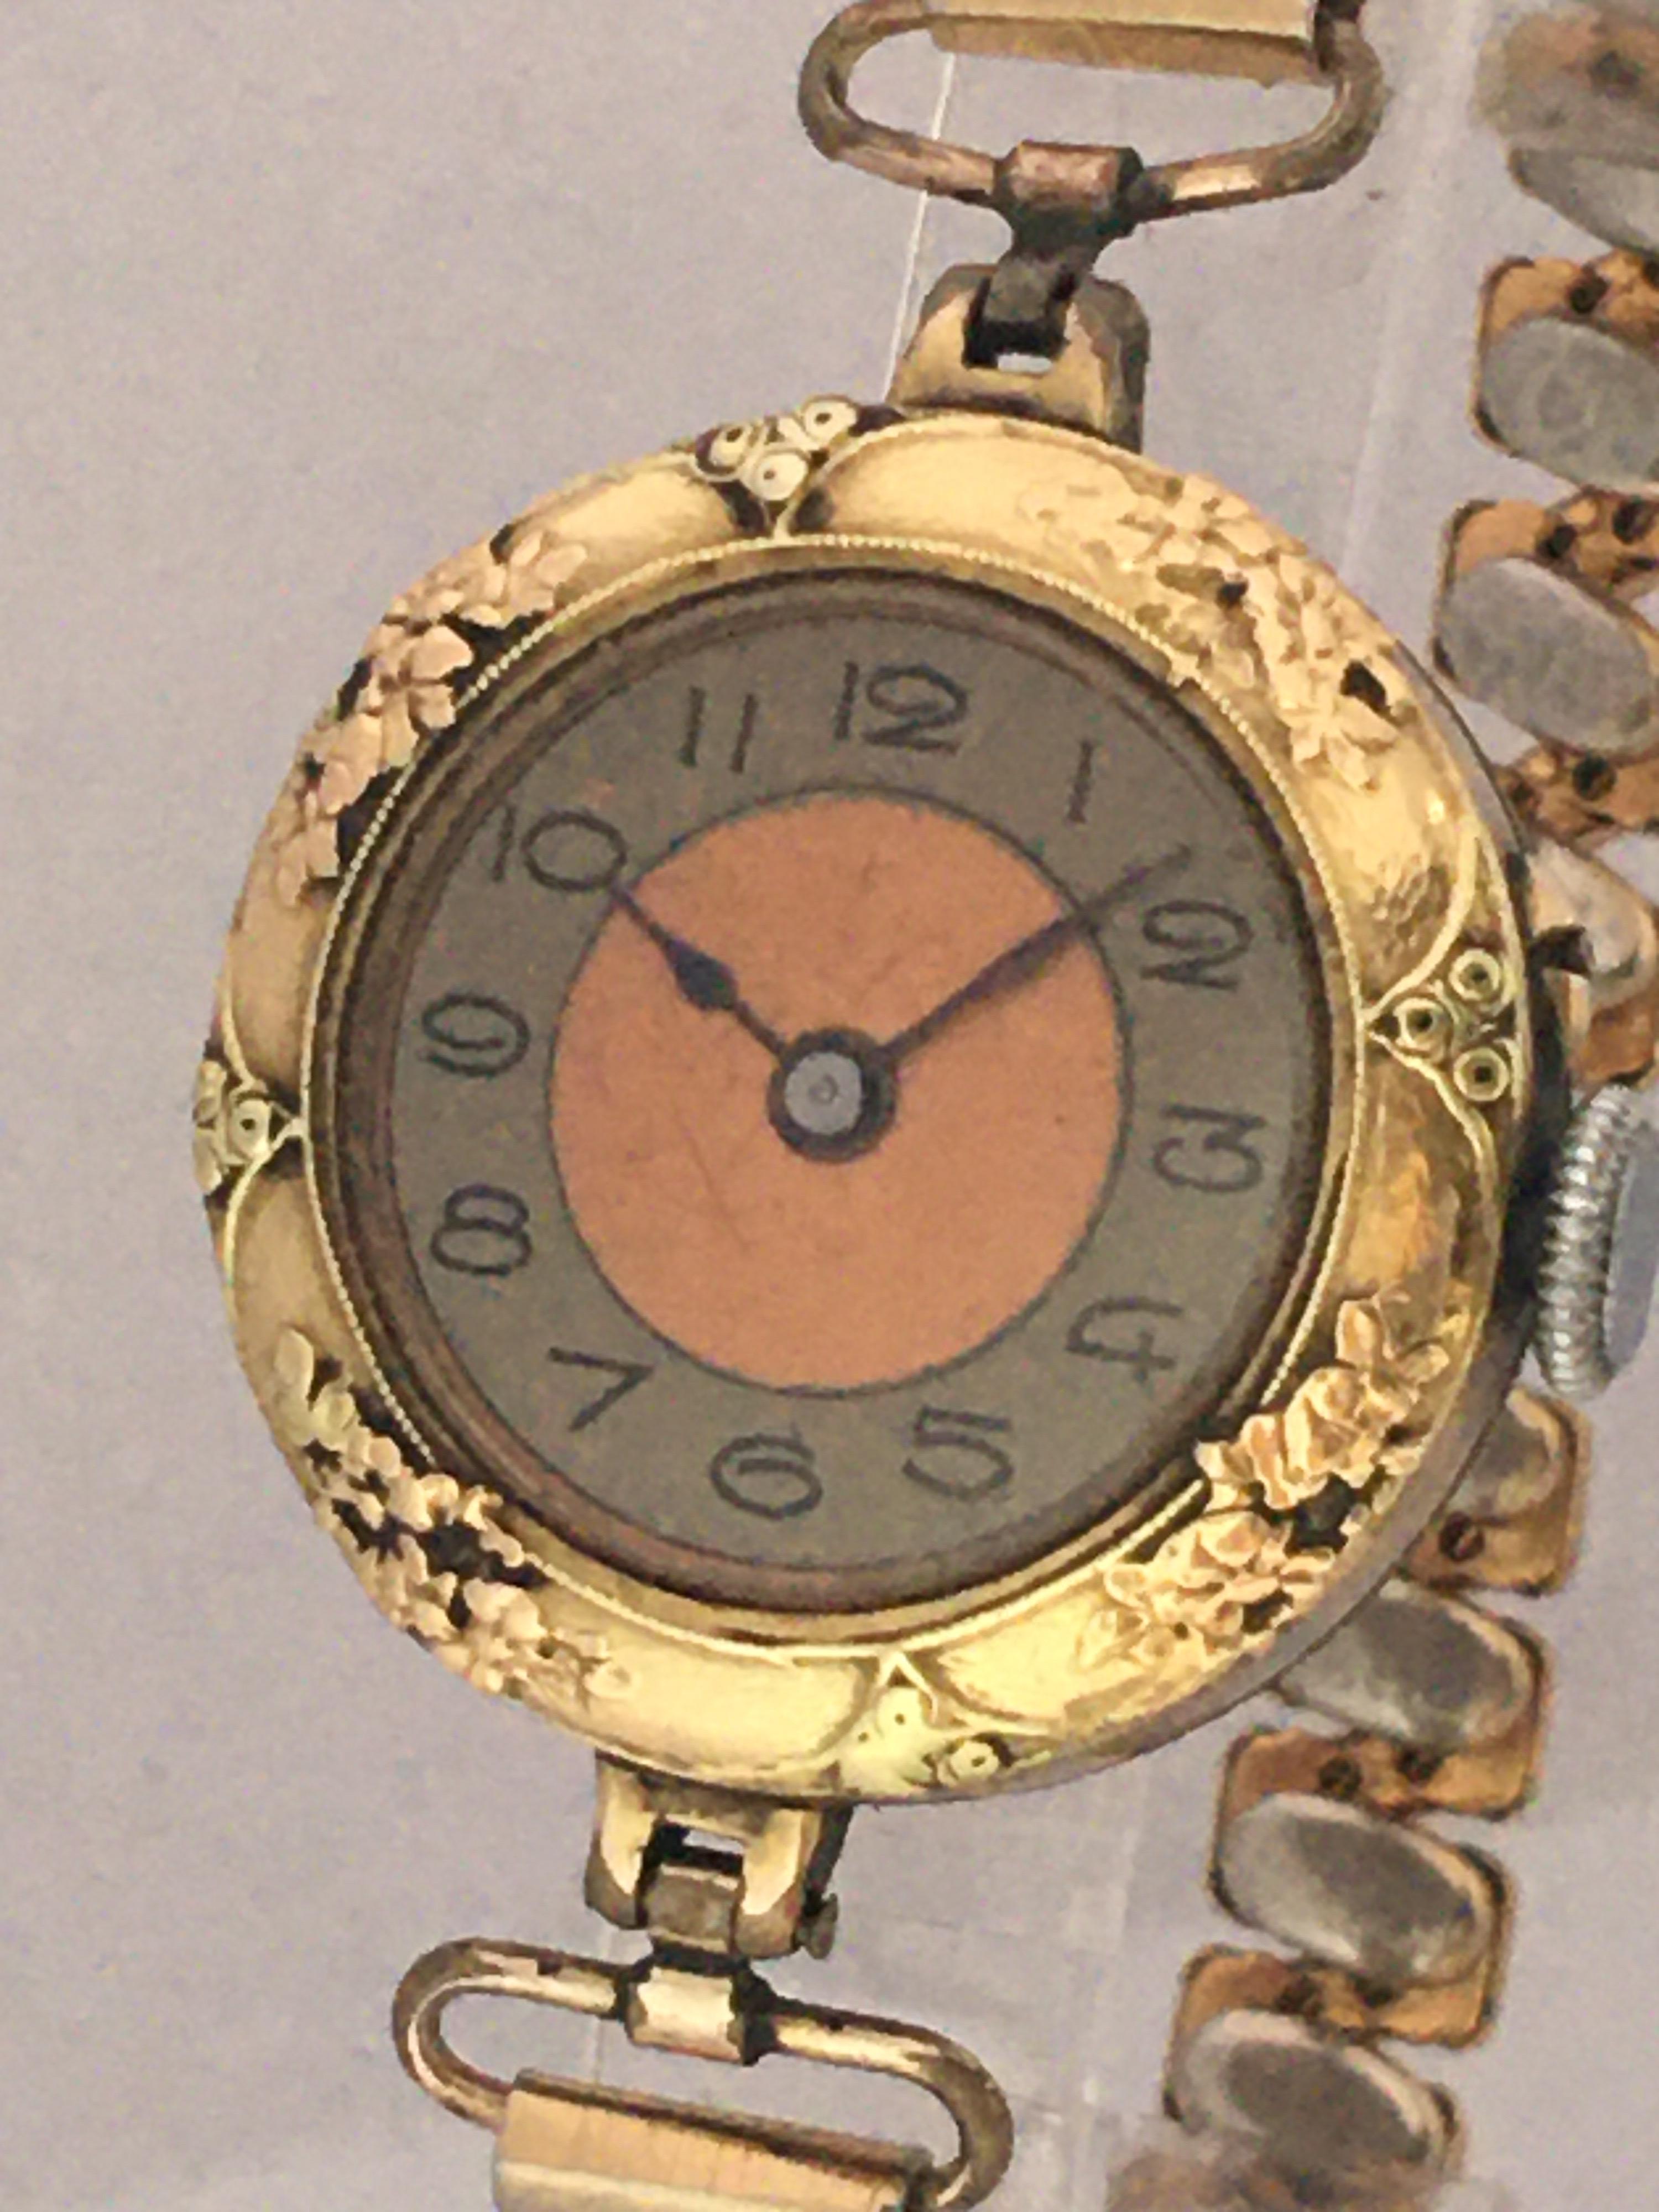 This beautiful 27mm watch diameter antique hand winding trench watch is in good working condition and it is running well. Some signs of used and ageing with tiny light scratches on the glass and on the gold plated watch case. It 6 inches flexible